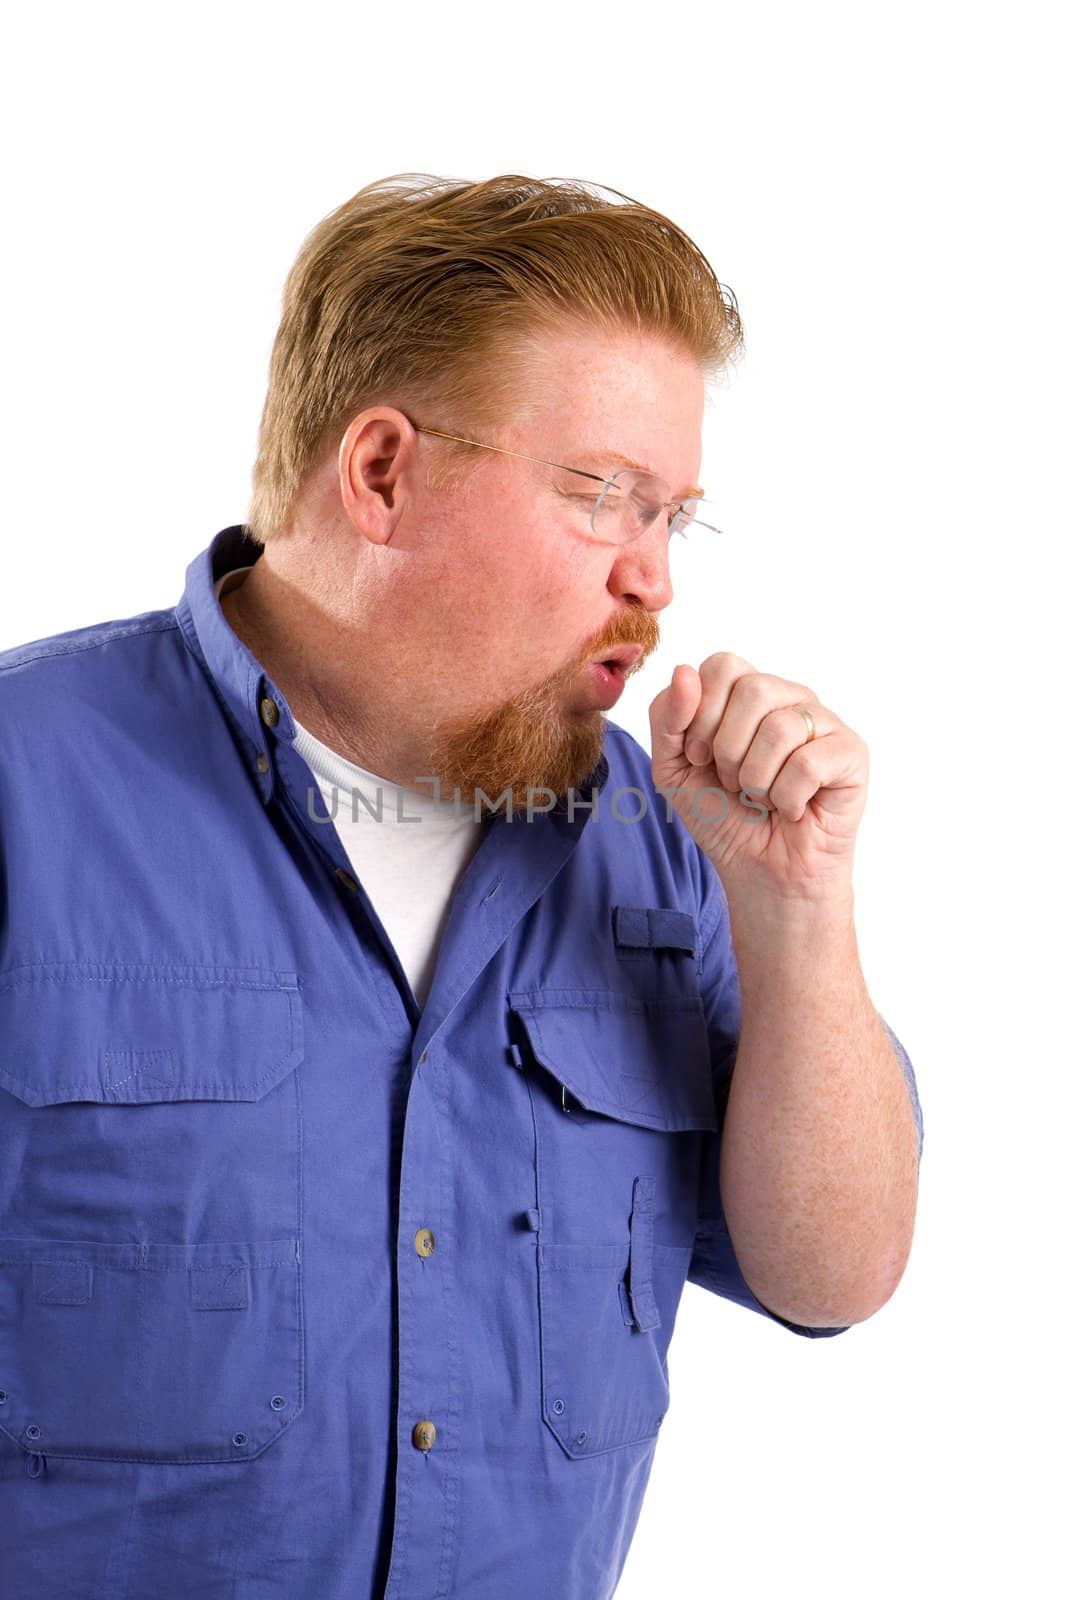 Sick mature man with emphysema coughs into his fist.